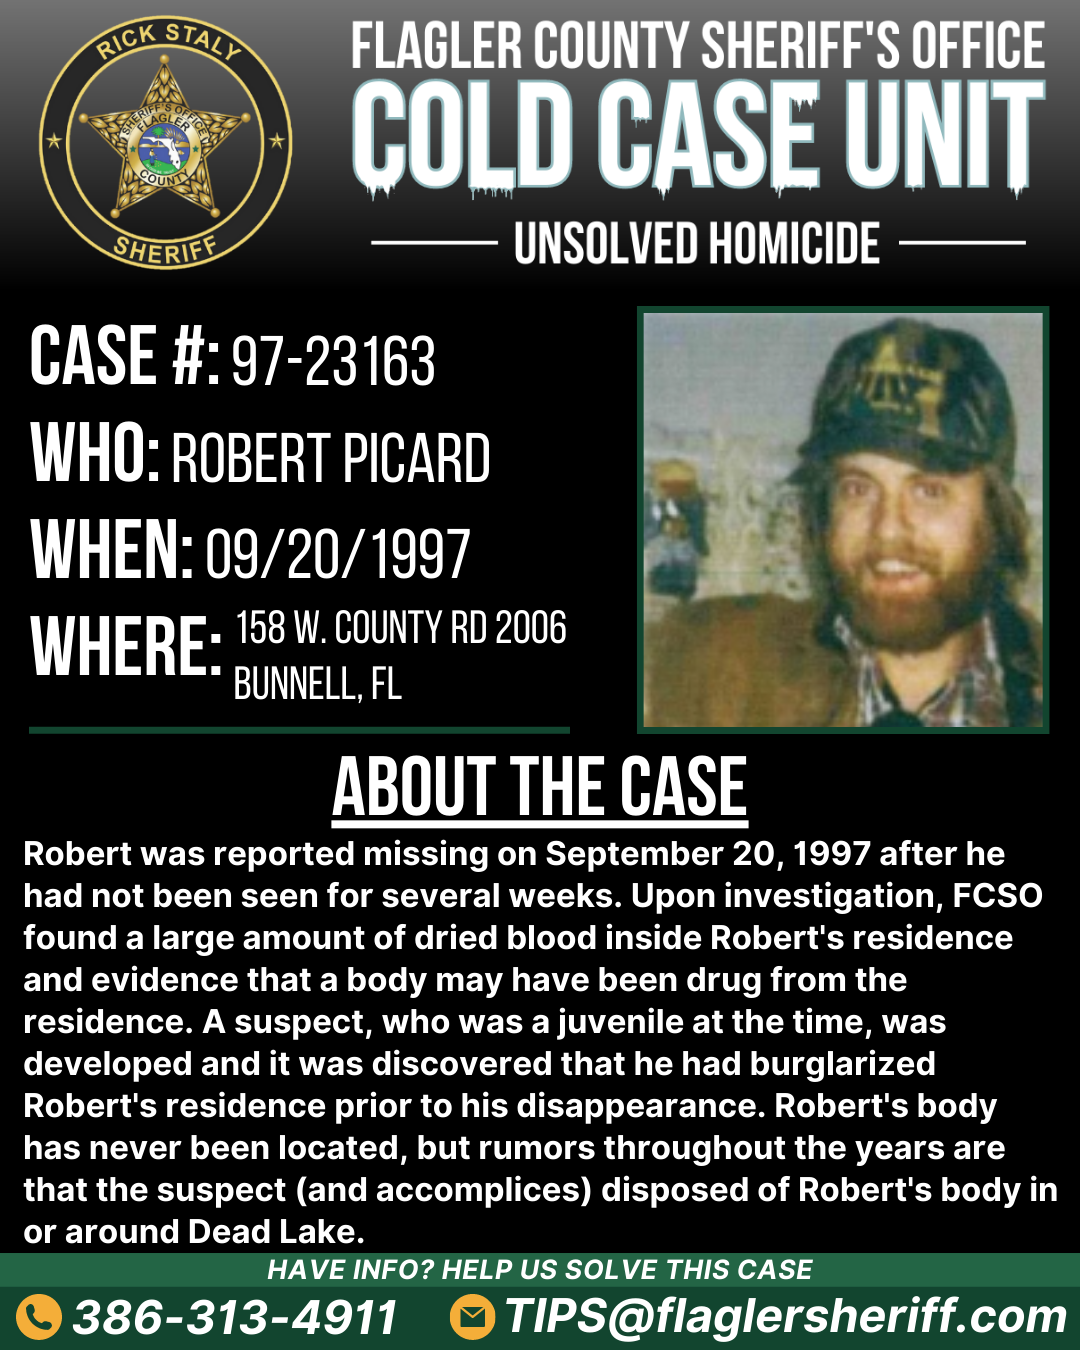 Unsolved homicide. Case #97-23163. Who: Robert Picard. When: 09/20/1997. Where: 158 West County Road 2006 (Bunnell, FL). About the case: Robert was reported missing on September 20, 1997 after he had not been seen for several weeks. Upon investigation, FCSO found a large amount of dried blood inside Robert's residence and evidence that a body may have been drug from the residence. A suspect, who was a juvenile at the time, was developed and it was discovered that he had burglarized Robert's residence prior to his disappearance. Robert's body has never been located, but rumors throughout the years are that the suspect (and accomplices) disposed of Robert's body in or around Dead Lake.